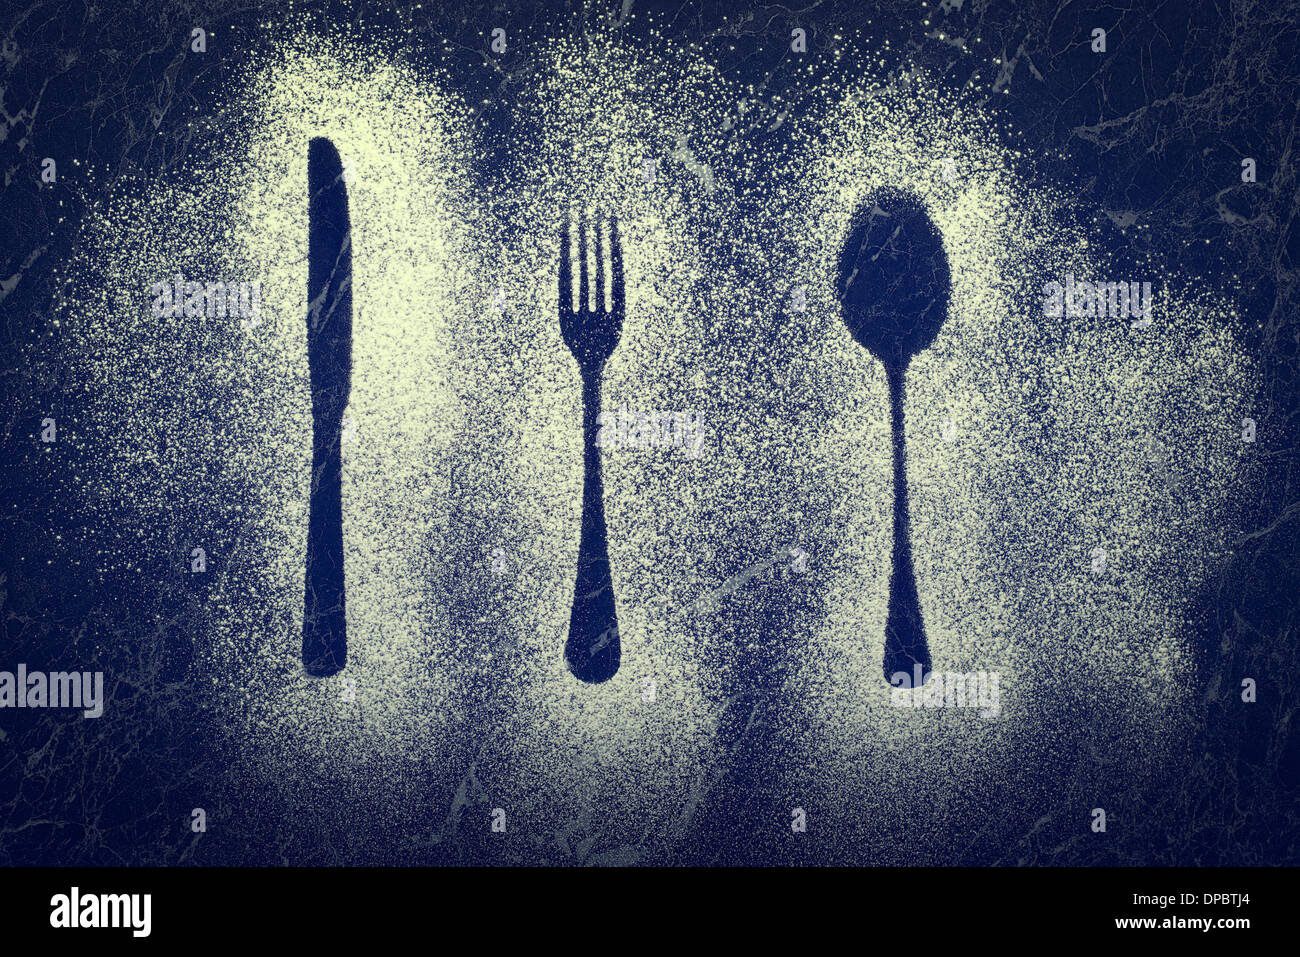 Outlines of knife, fork and spoon made with a dusting of icing sugar Stock Photo